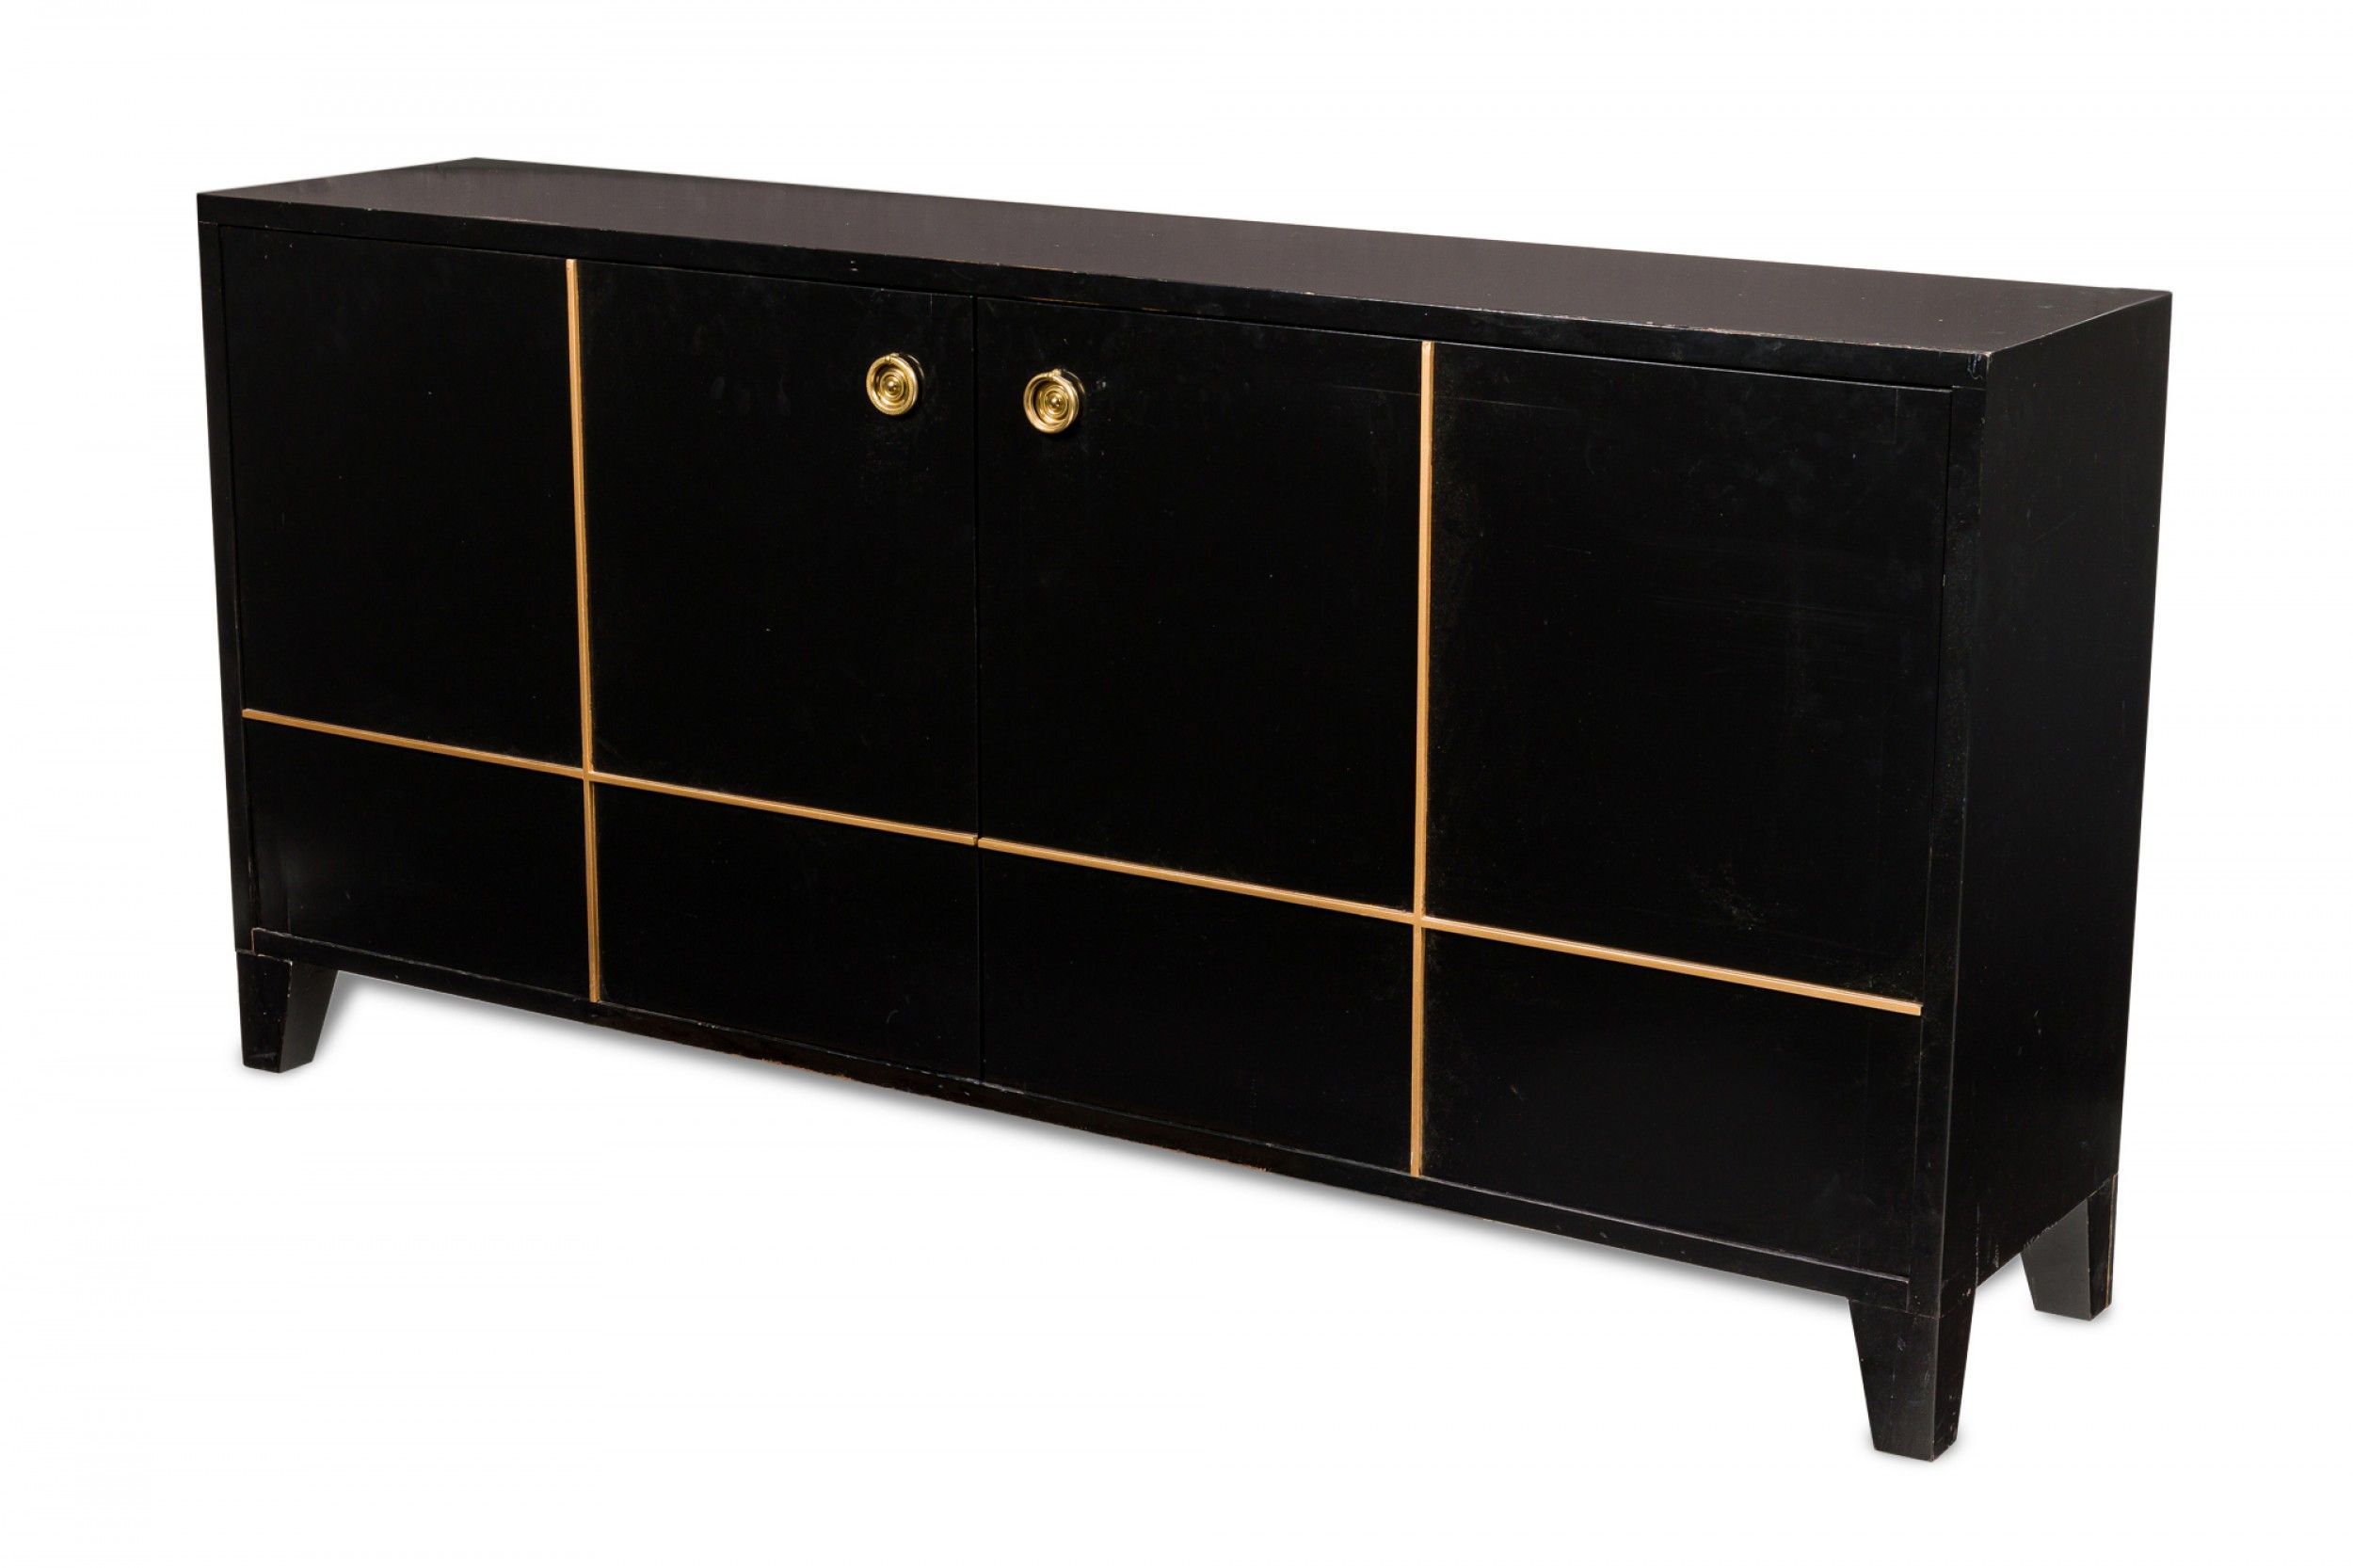 Contemporary American Black And Gold Painted Geometric Design Console  Cabinet Sideboard Within Geometric Sideboards (View 11 of 15)